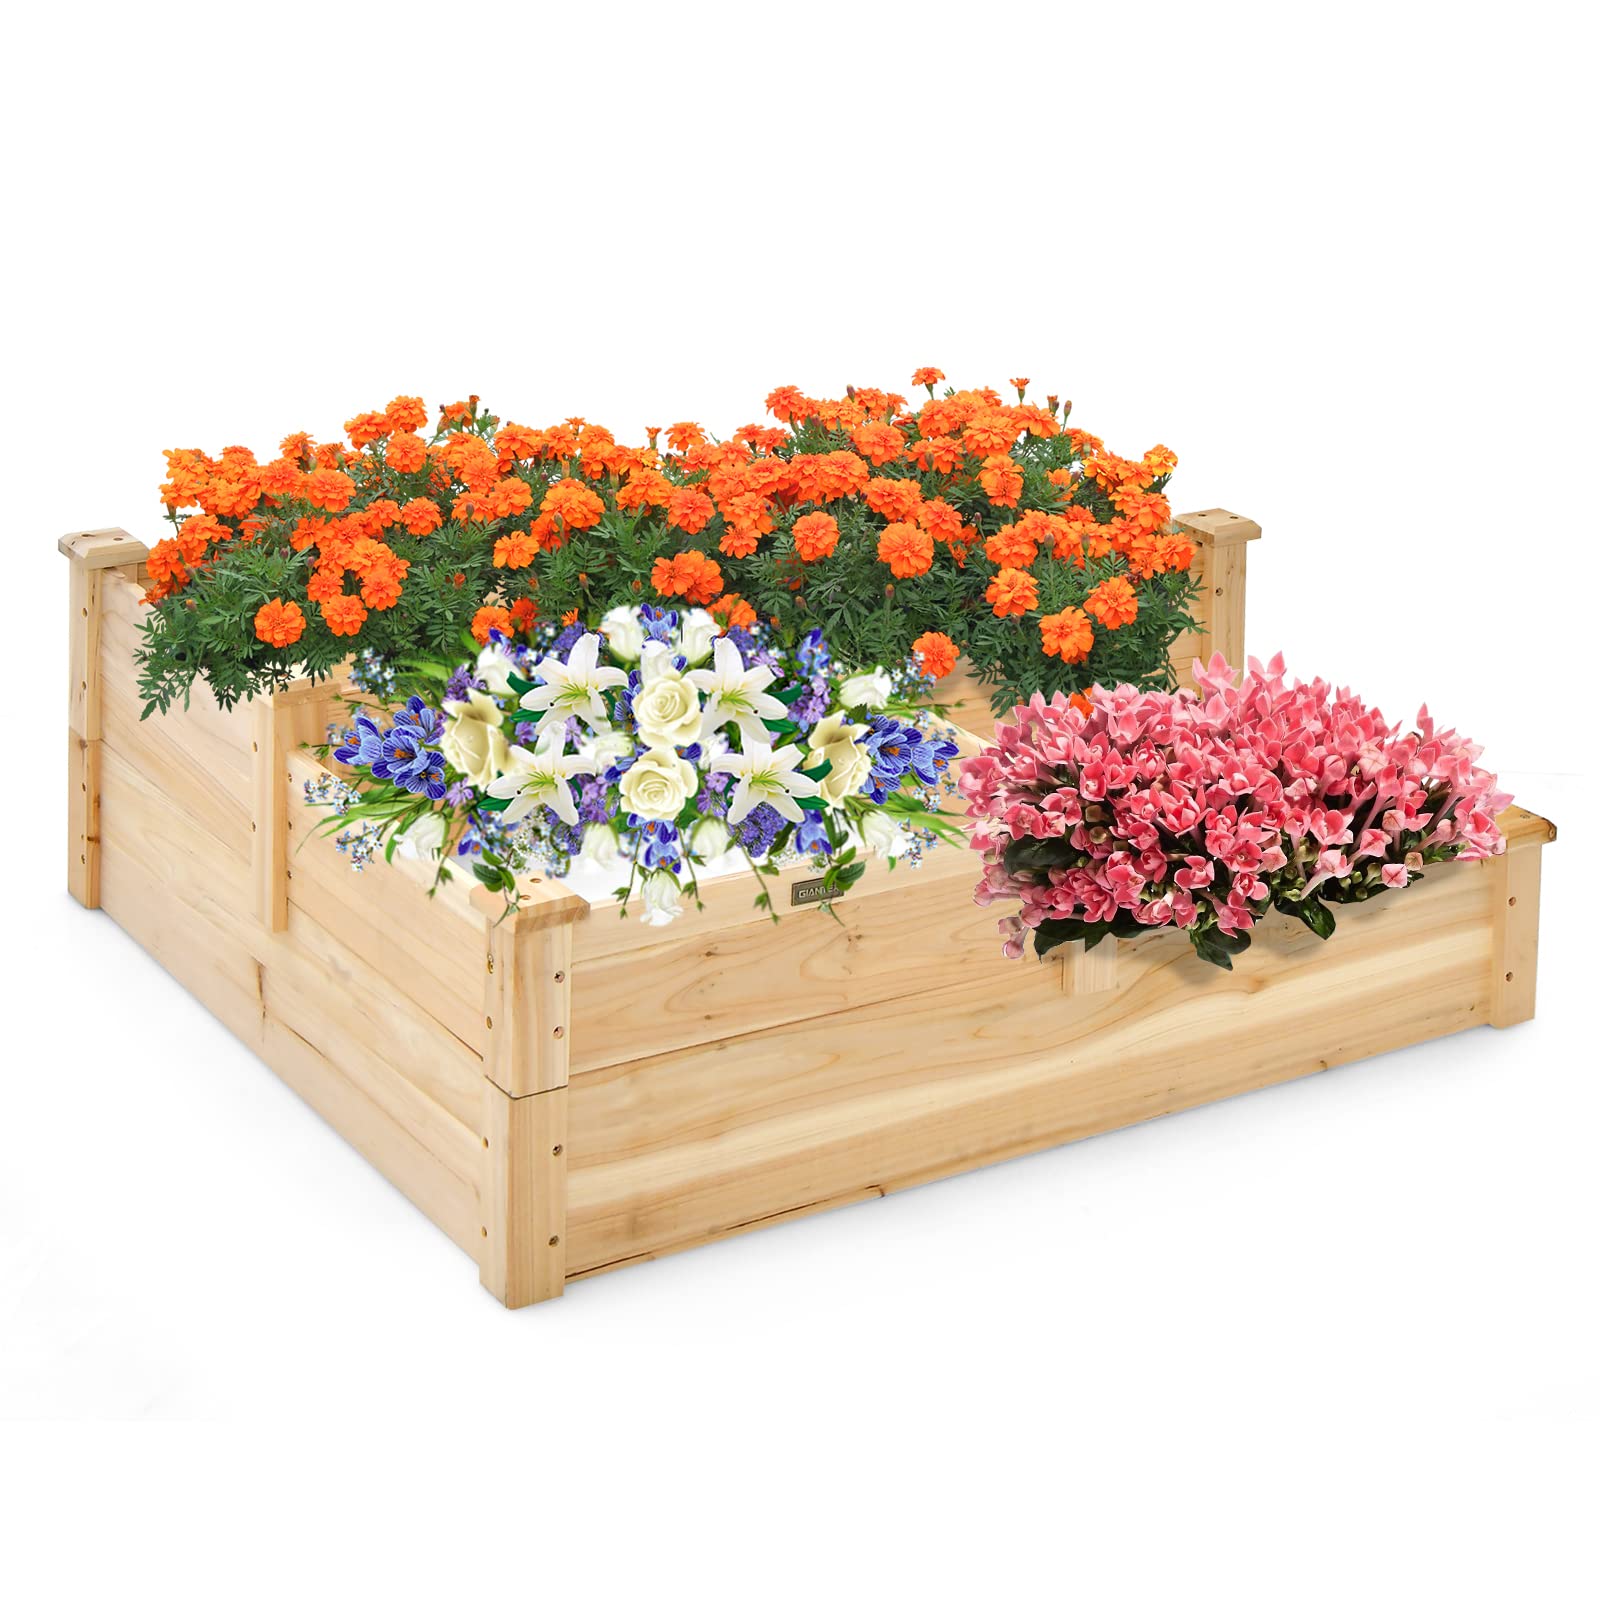 Giantex U-Shaped Raised Garden Bed, Wood Raised Garden Planter Box for  Vegetables and Flowers, Easy Assembly, Garden Container for Backyard,  Patio